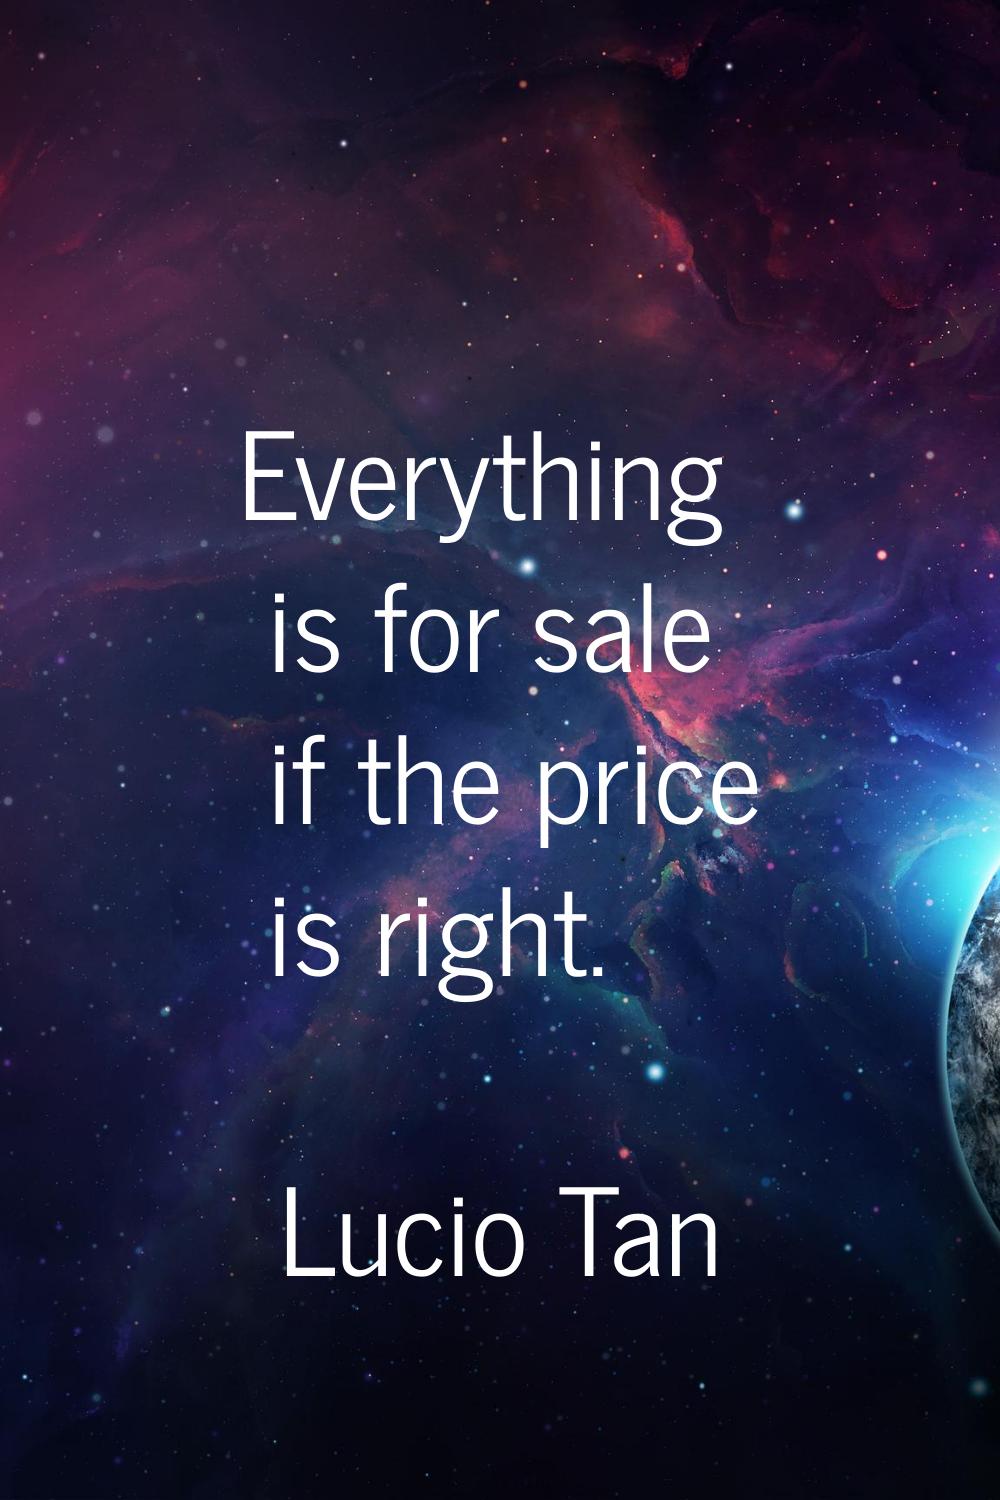 Everything is for sale if the price is right.